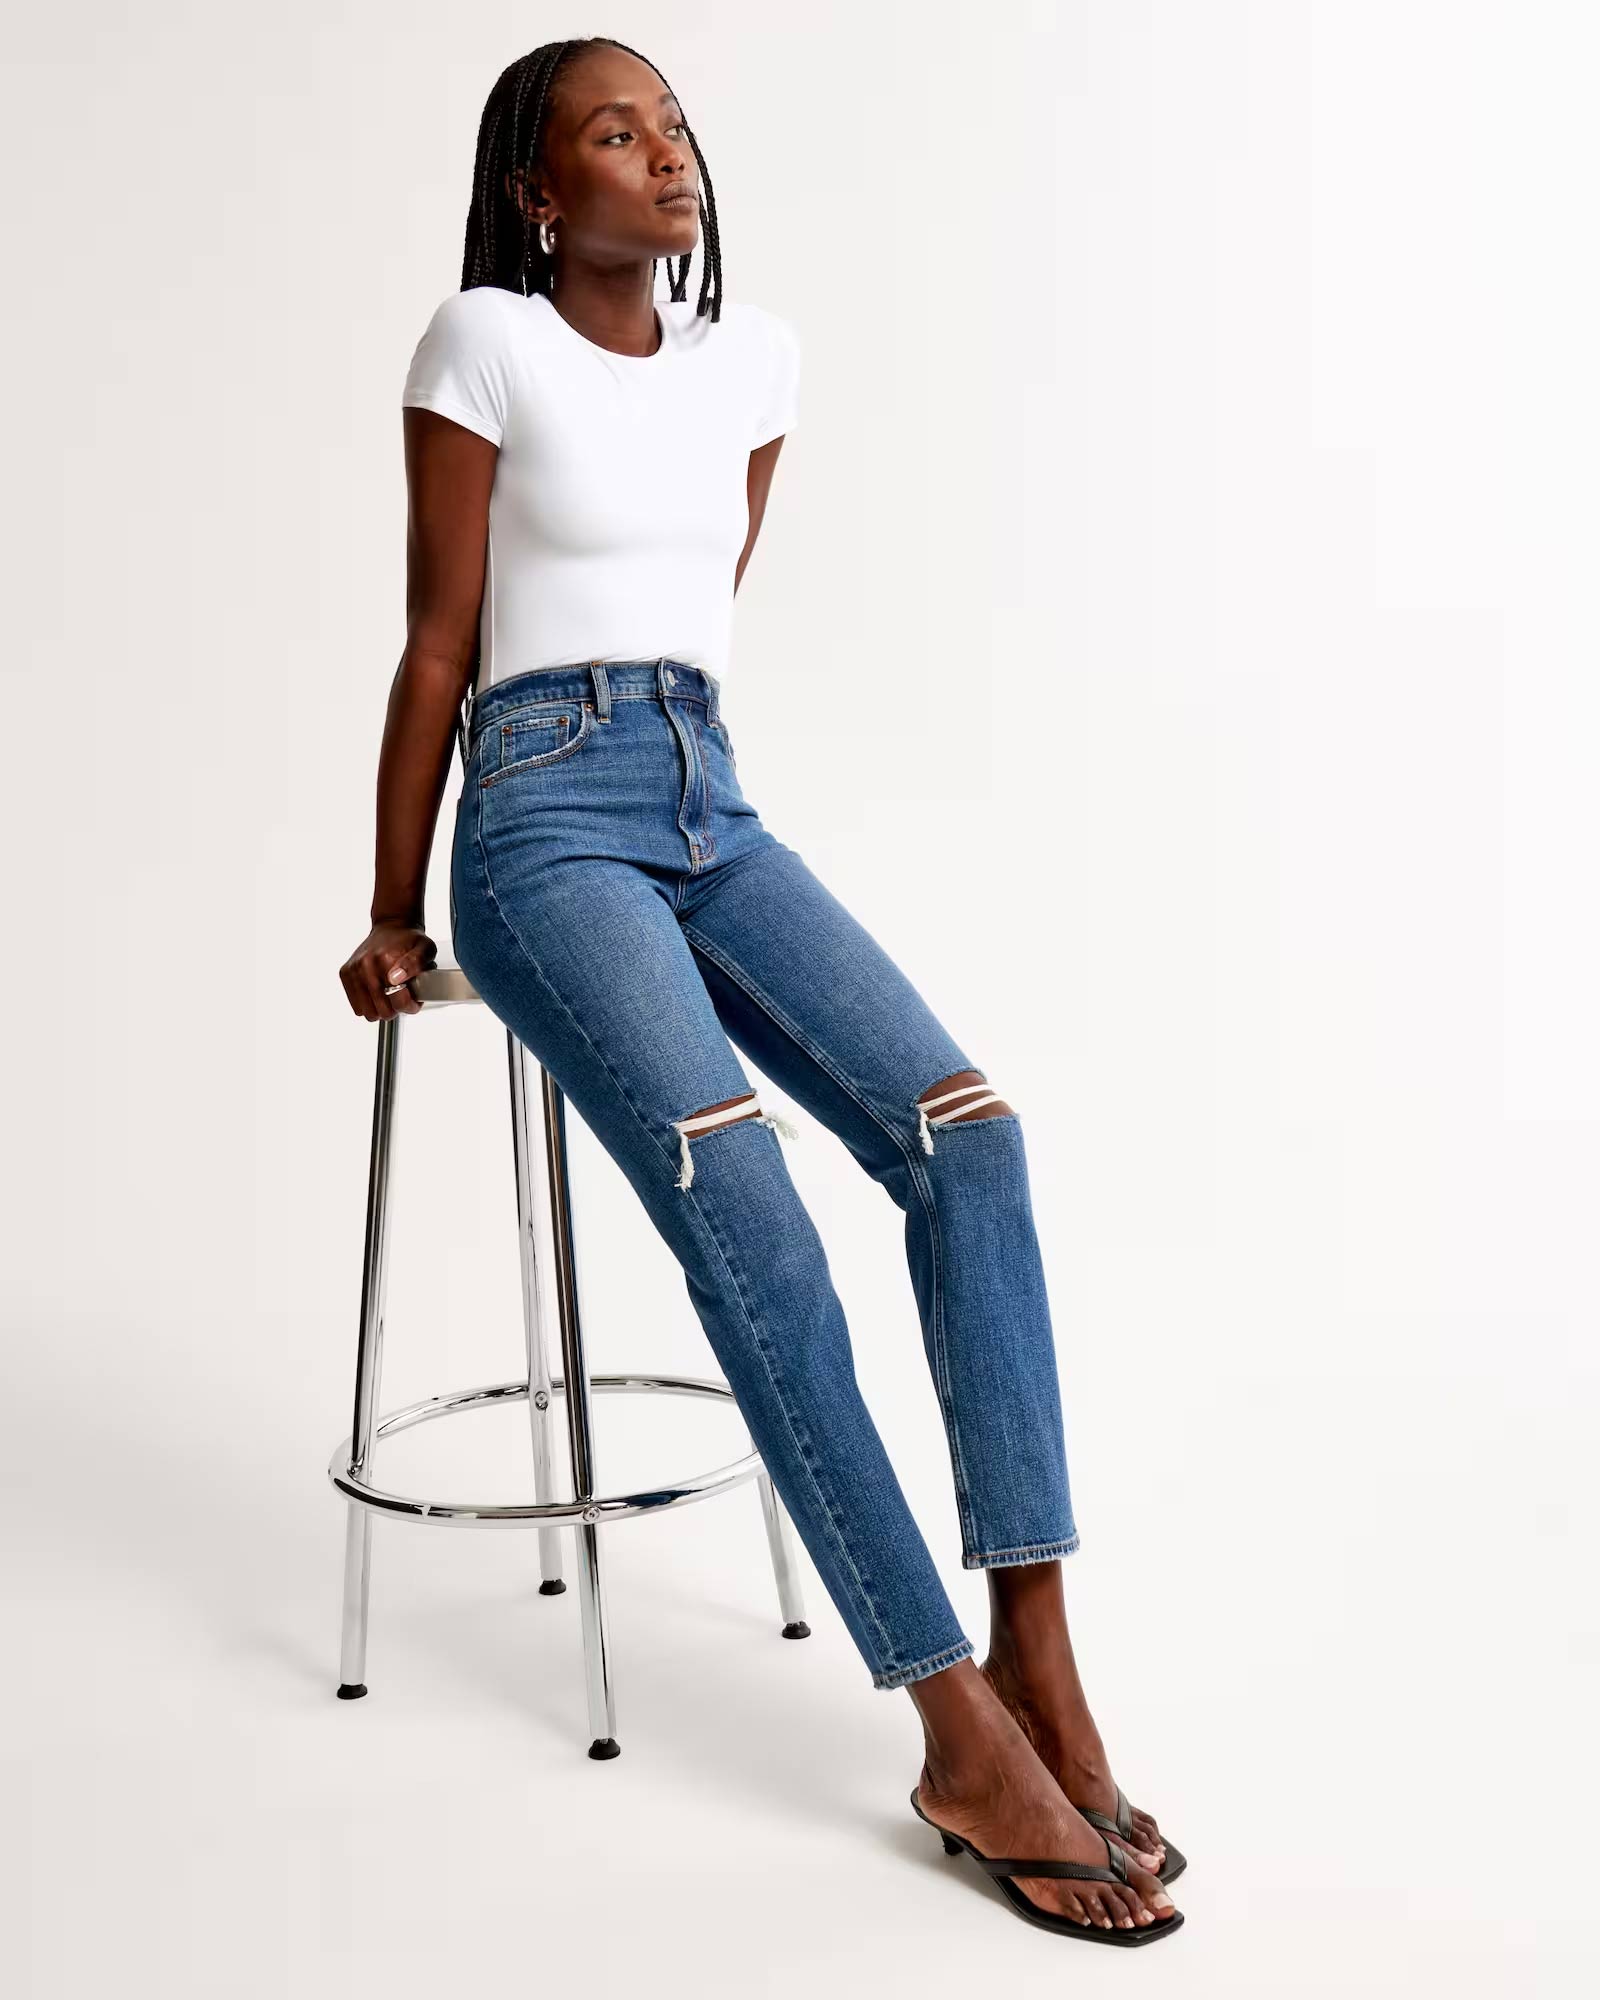 6 Abercrombie & Fitch Jeans You Need Right Now - THE JEANS BLOG